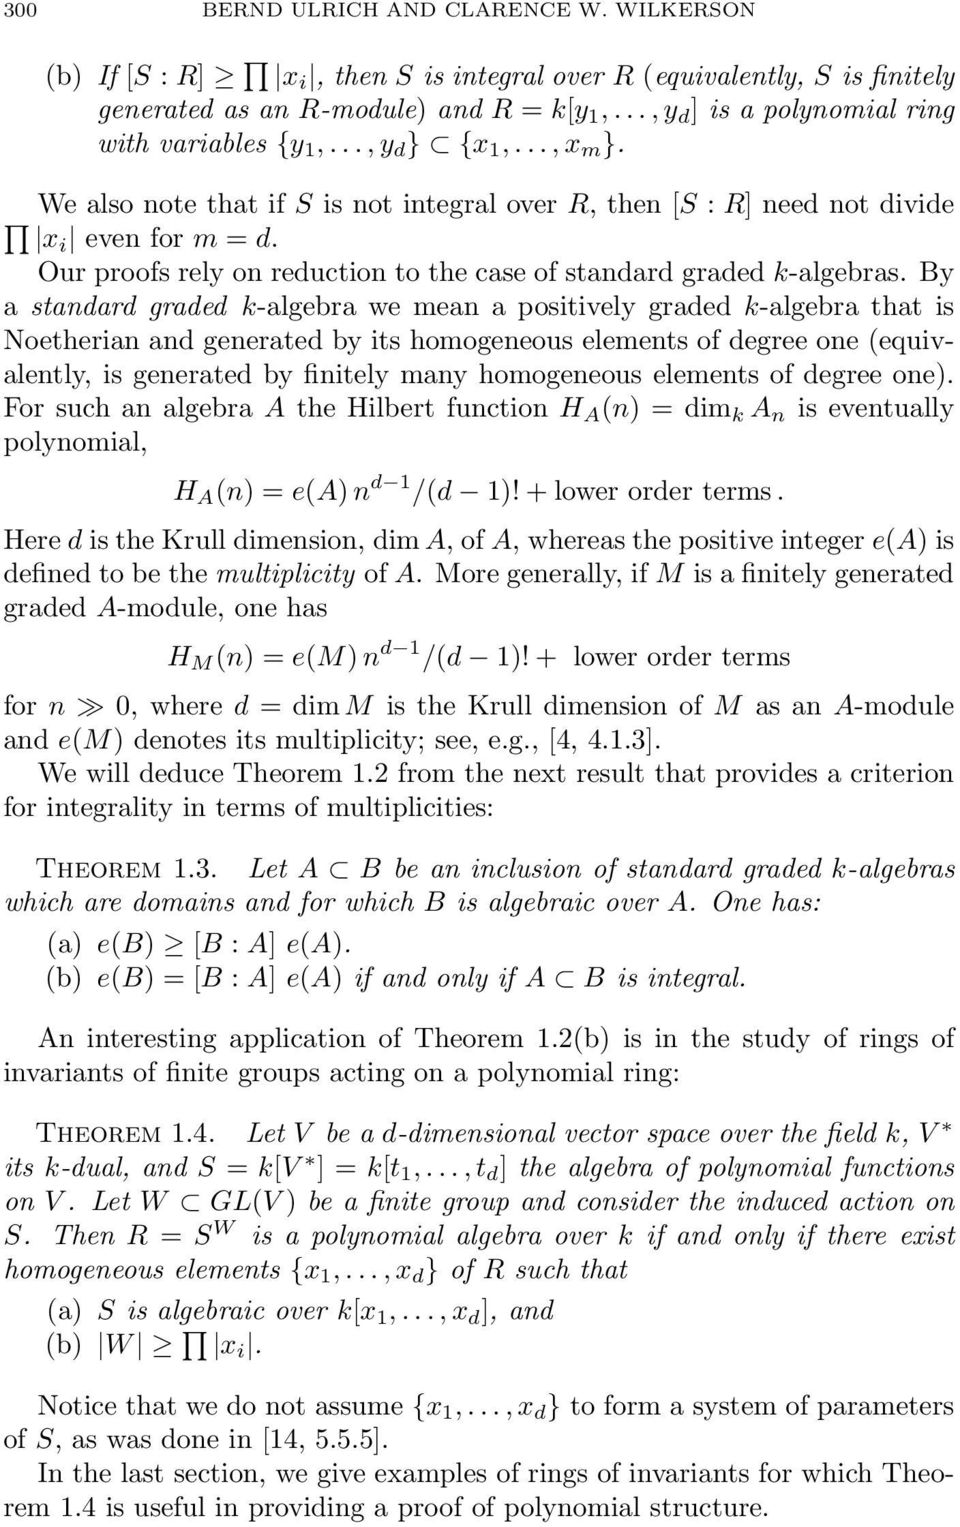 Our proofs rely on reduction to the case of standard graded k-algebras.